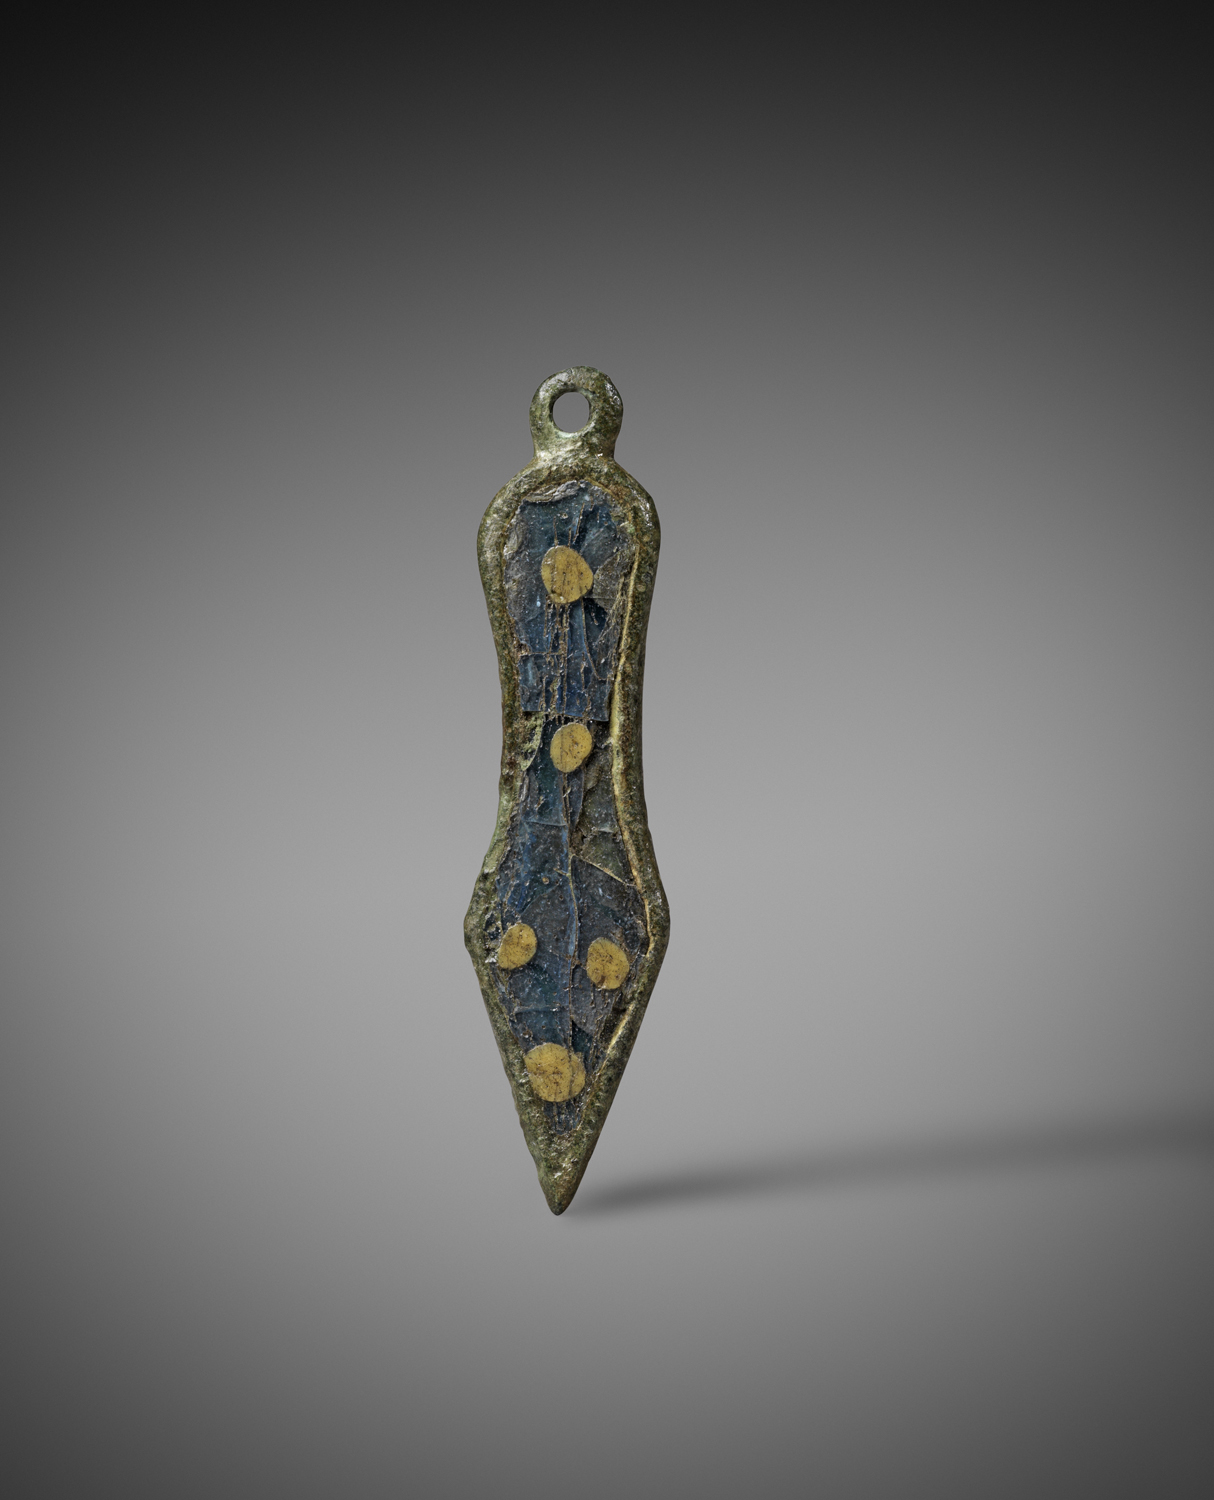   Romano-British Brooch in the Form of a Sandal-sole ,&nbsp;Circa 2nd century C.E.,&nbsp;Bronze with enamel inlays,&nbsp;Length 4 cm,&nbsp;Courtesy Rupert Wace Ancient Art, London 